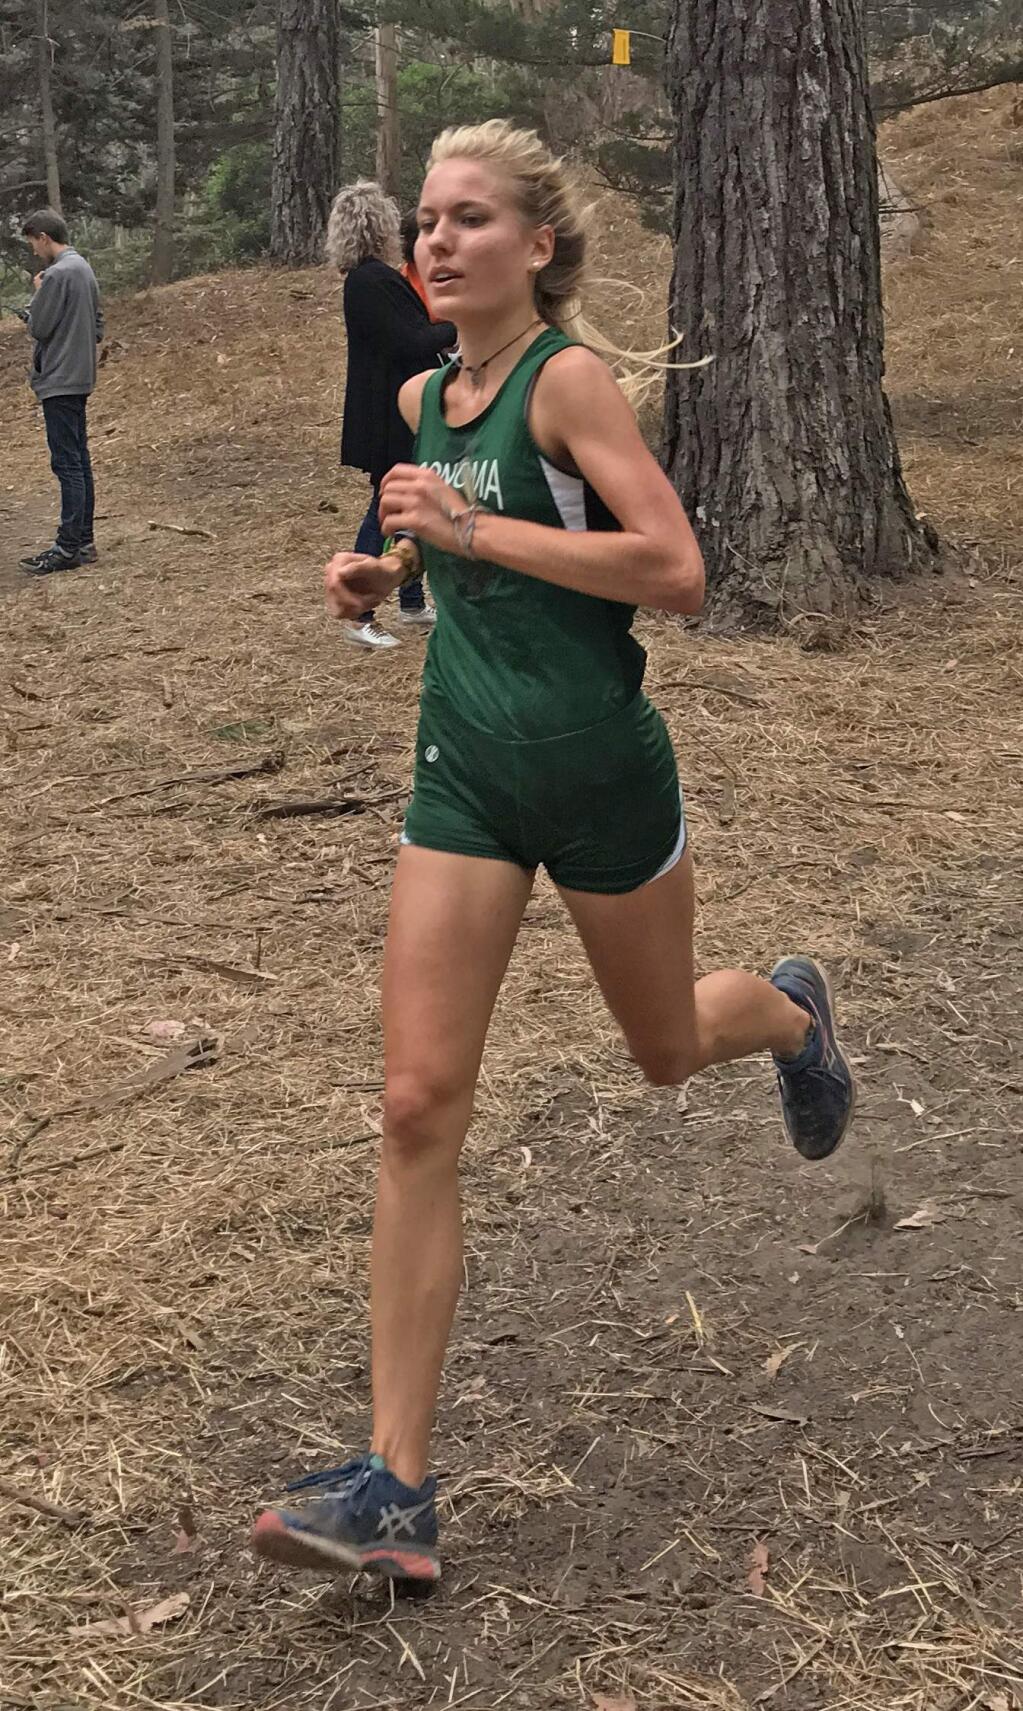 Submitted photoSenior Jenna Ebert was one of the Sonoma Valley High runners at the Lowell Invitational Saturday.